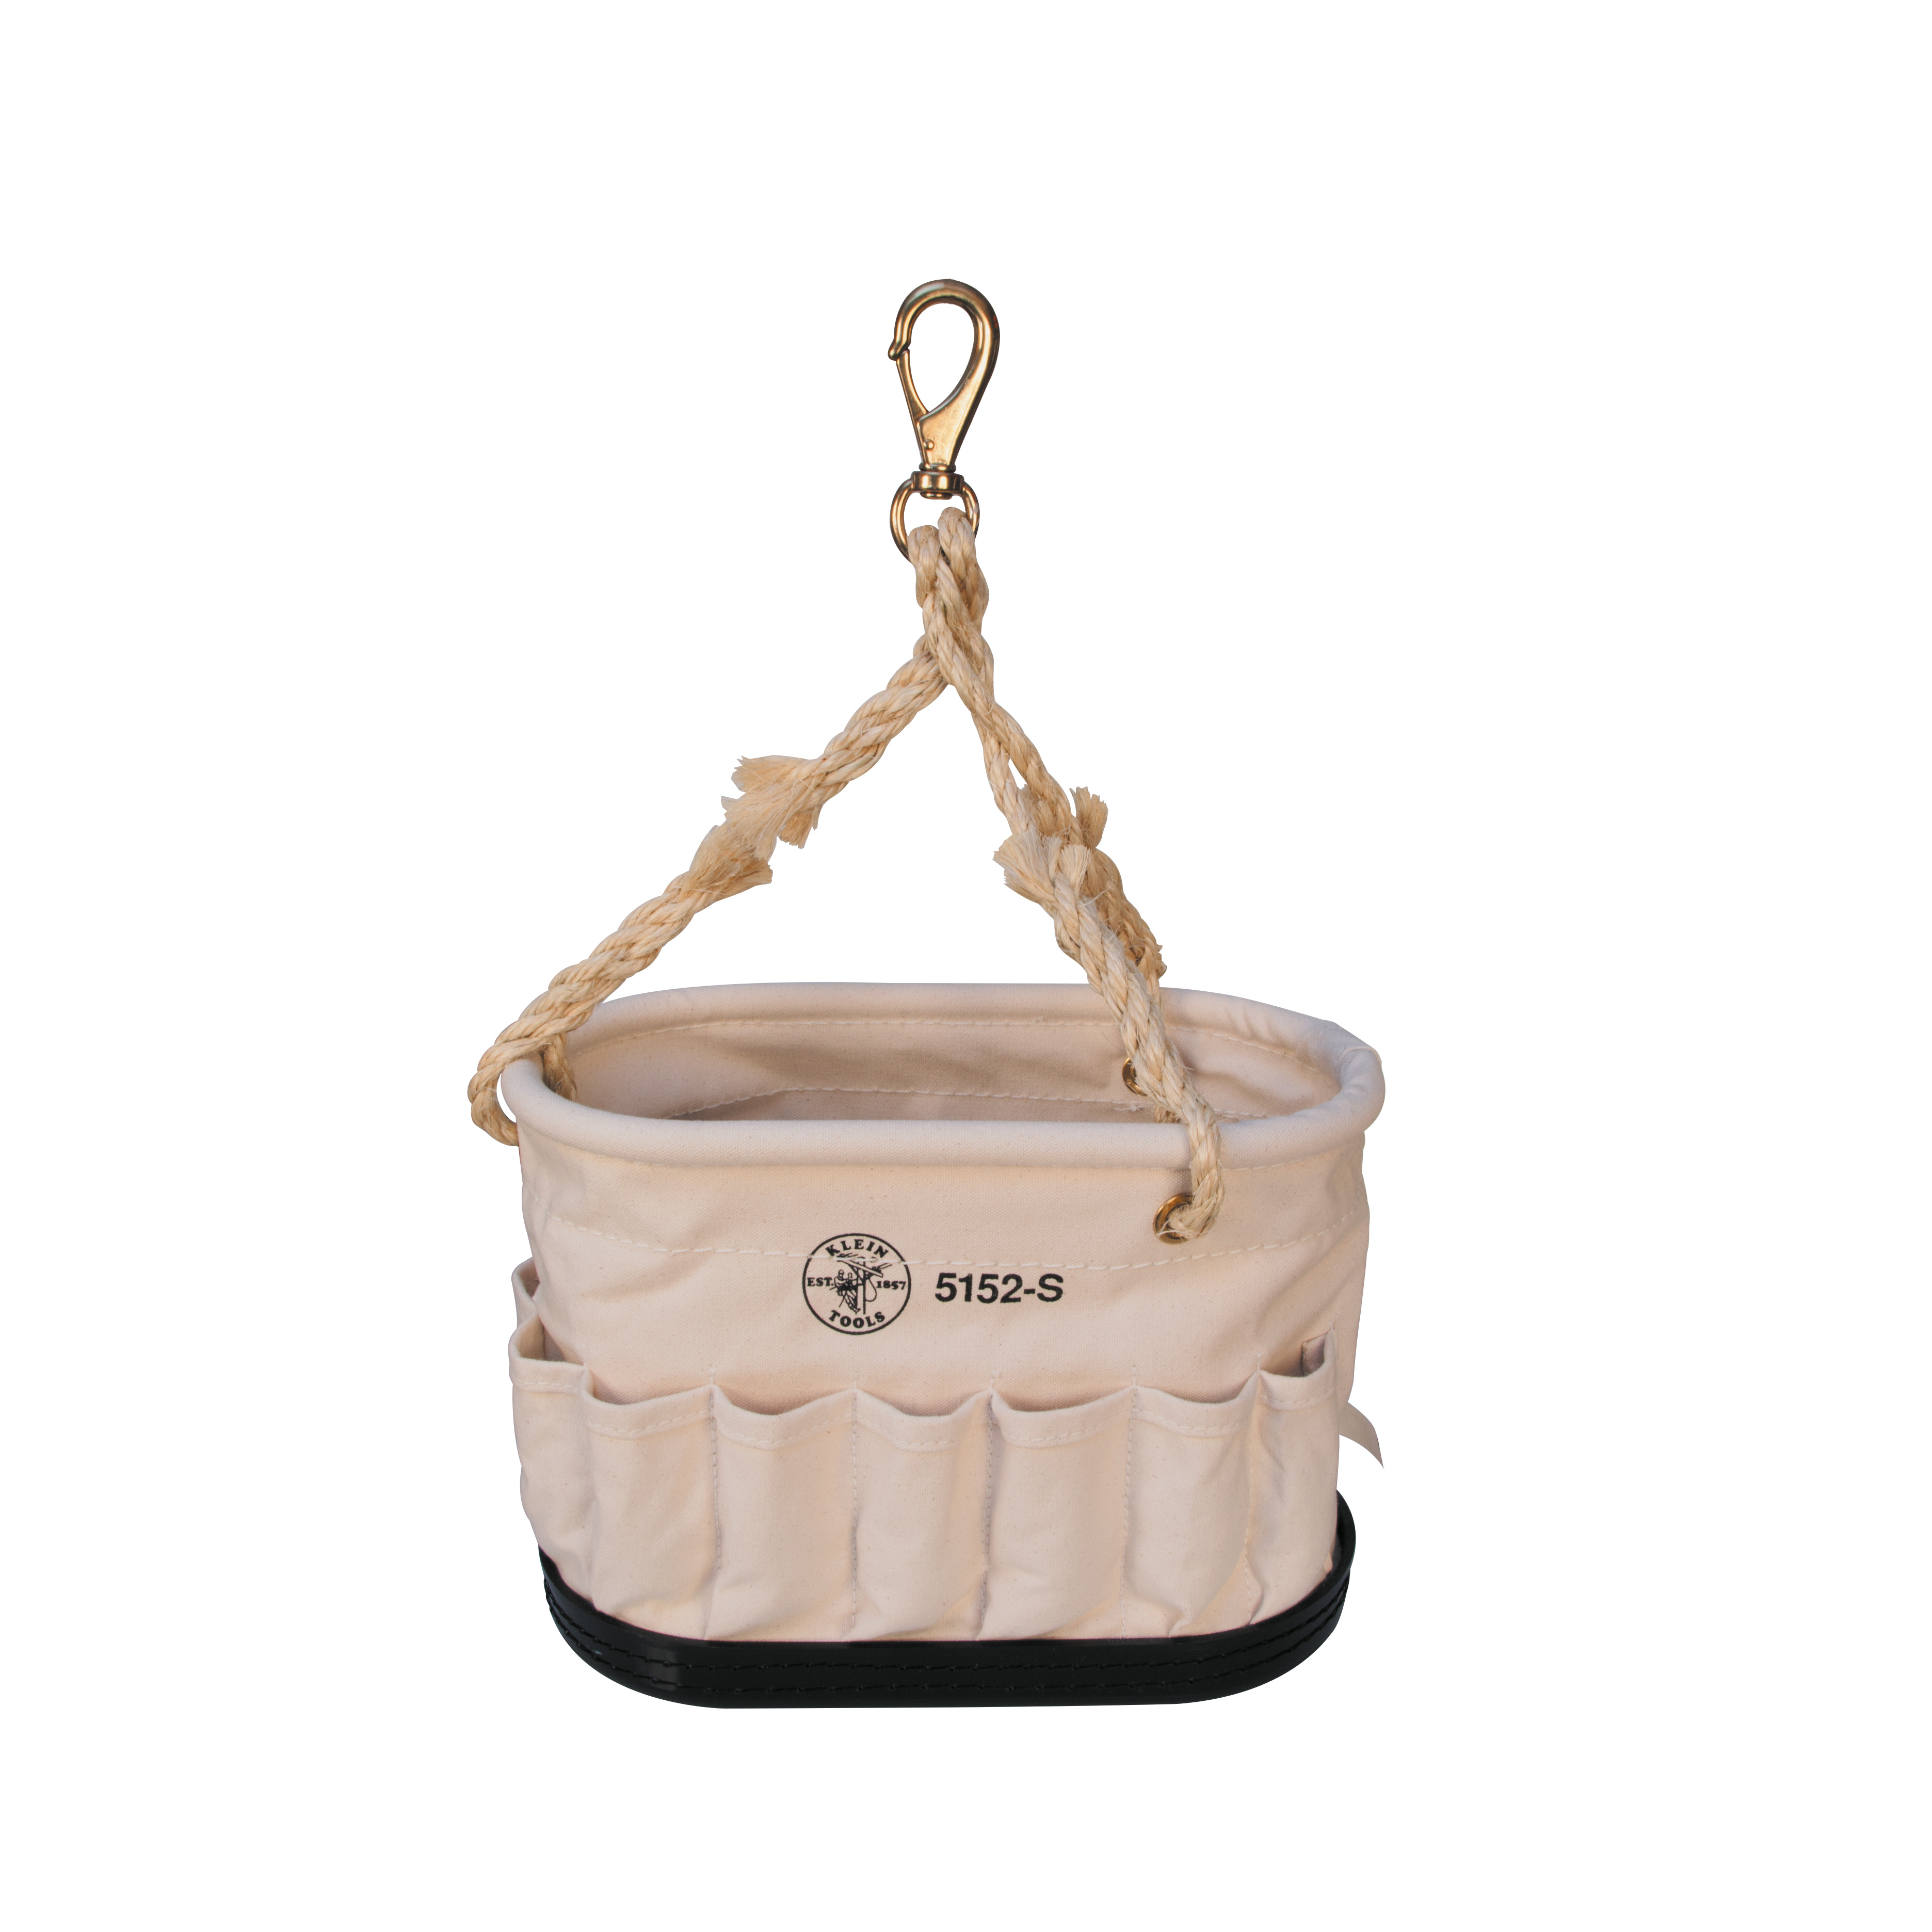 5152S 092644555206 Canvas Bucket, 41-Pocket Oval Bucket with Swivel Snap, Tool organizer with 26 pockets inside and 15 pockets outside